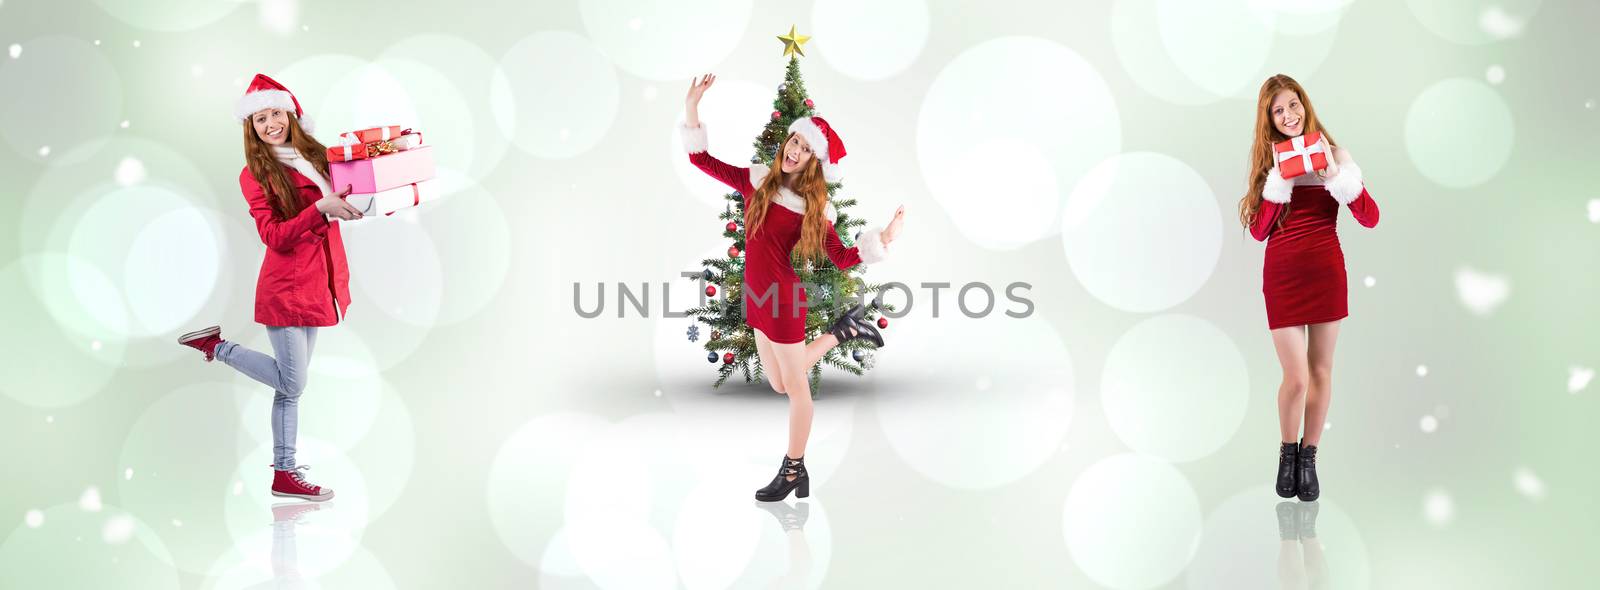 Festive redhead smiling at camera against grey abstract light spot design